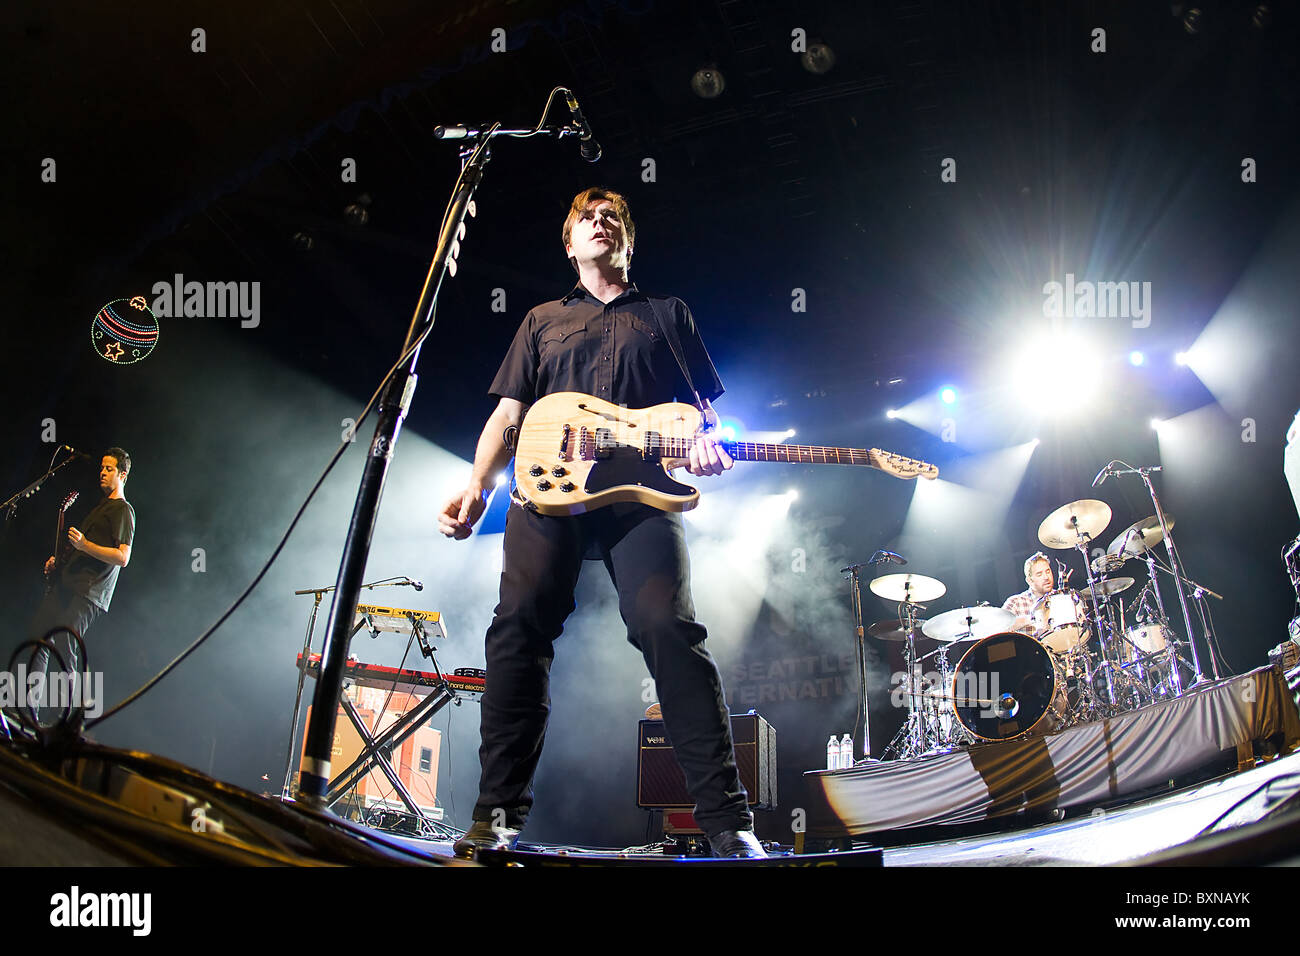 Rock Band Jimmy Eat World performing live in concert Stock Photo - Alamy